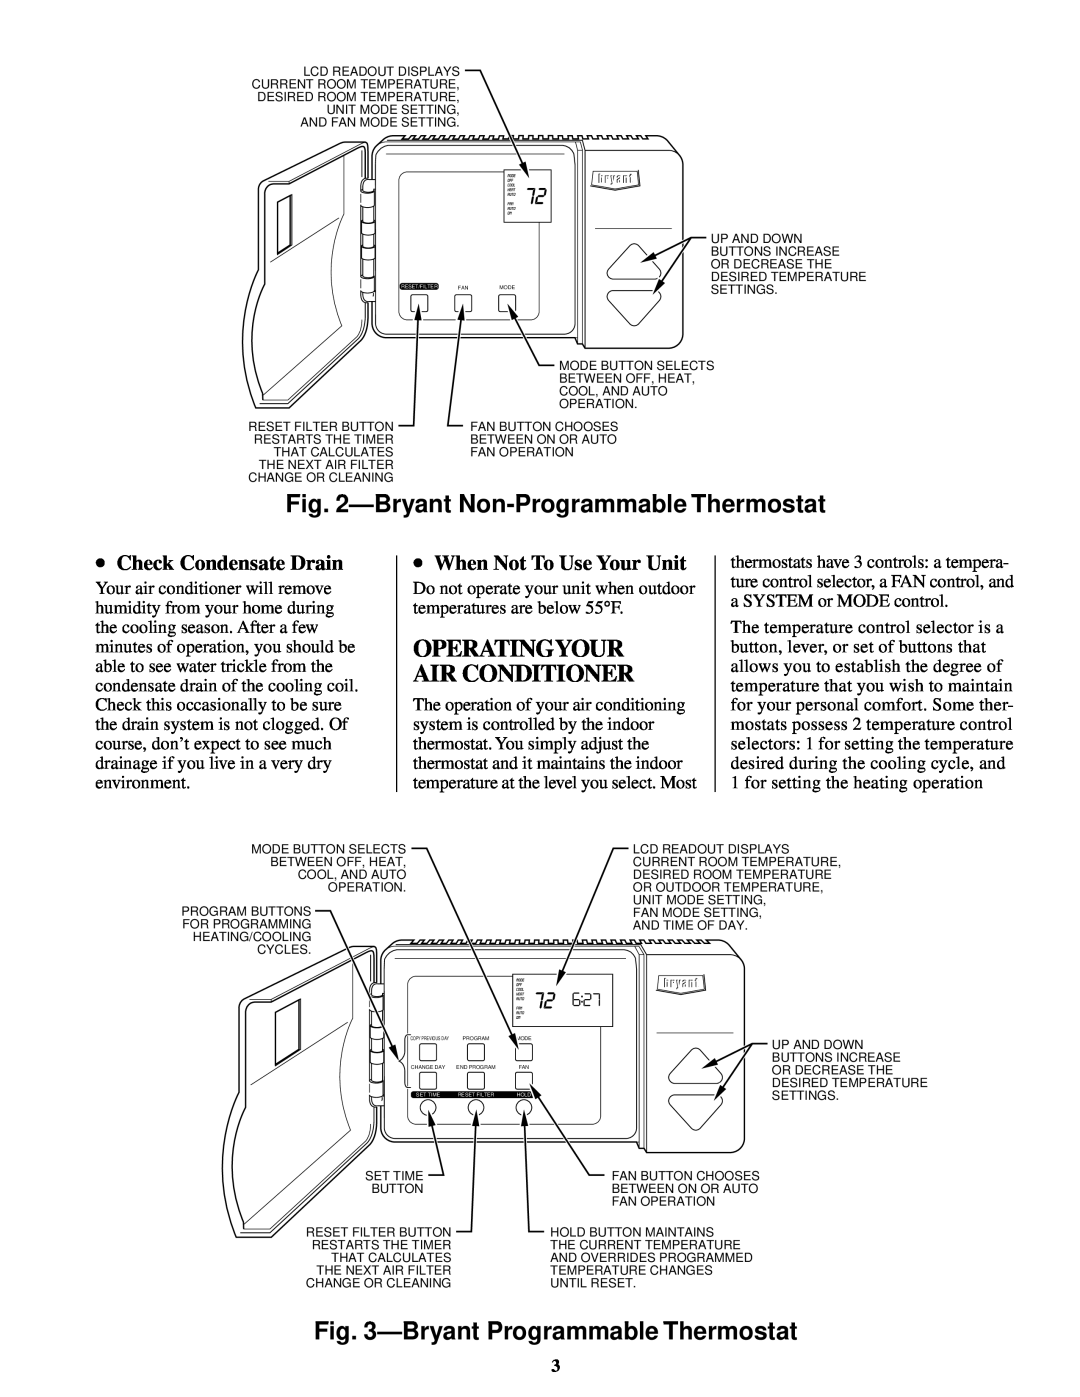 Bryant CENTRAL AIR CONDITIONER manual Bryant Non-ProgrammableThermostat, BryantProgrammable Thermostat 